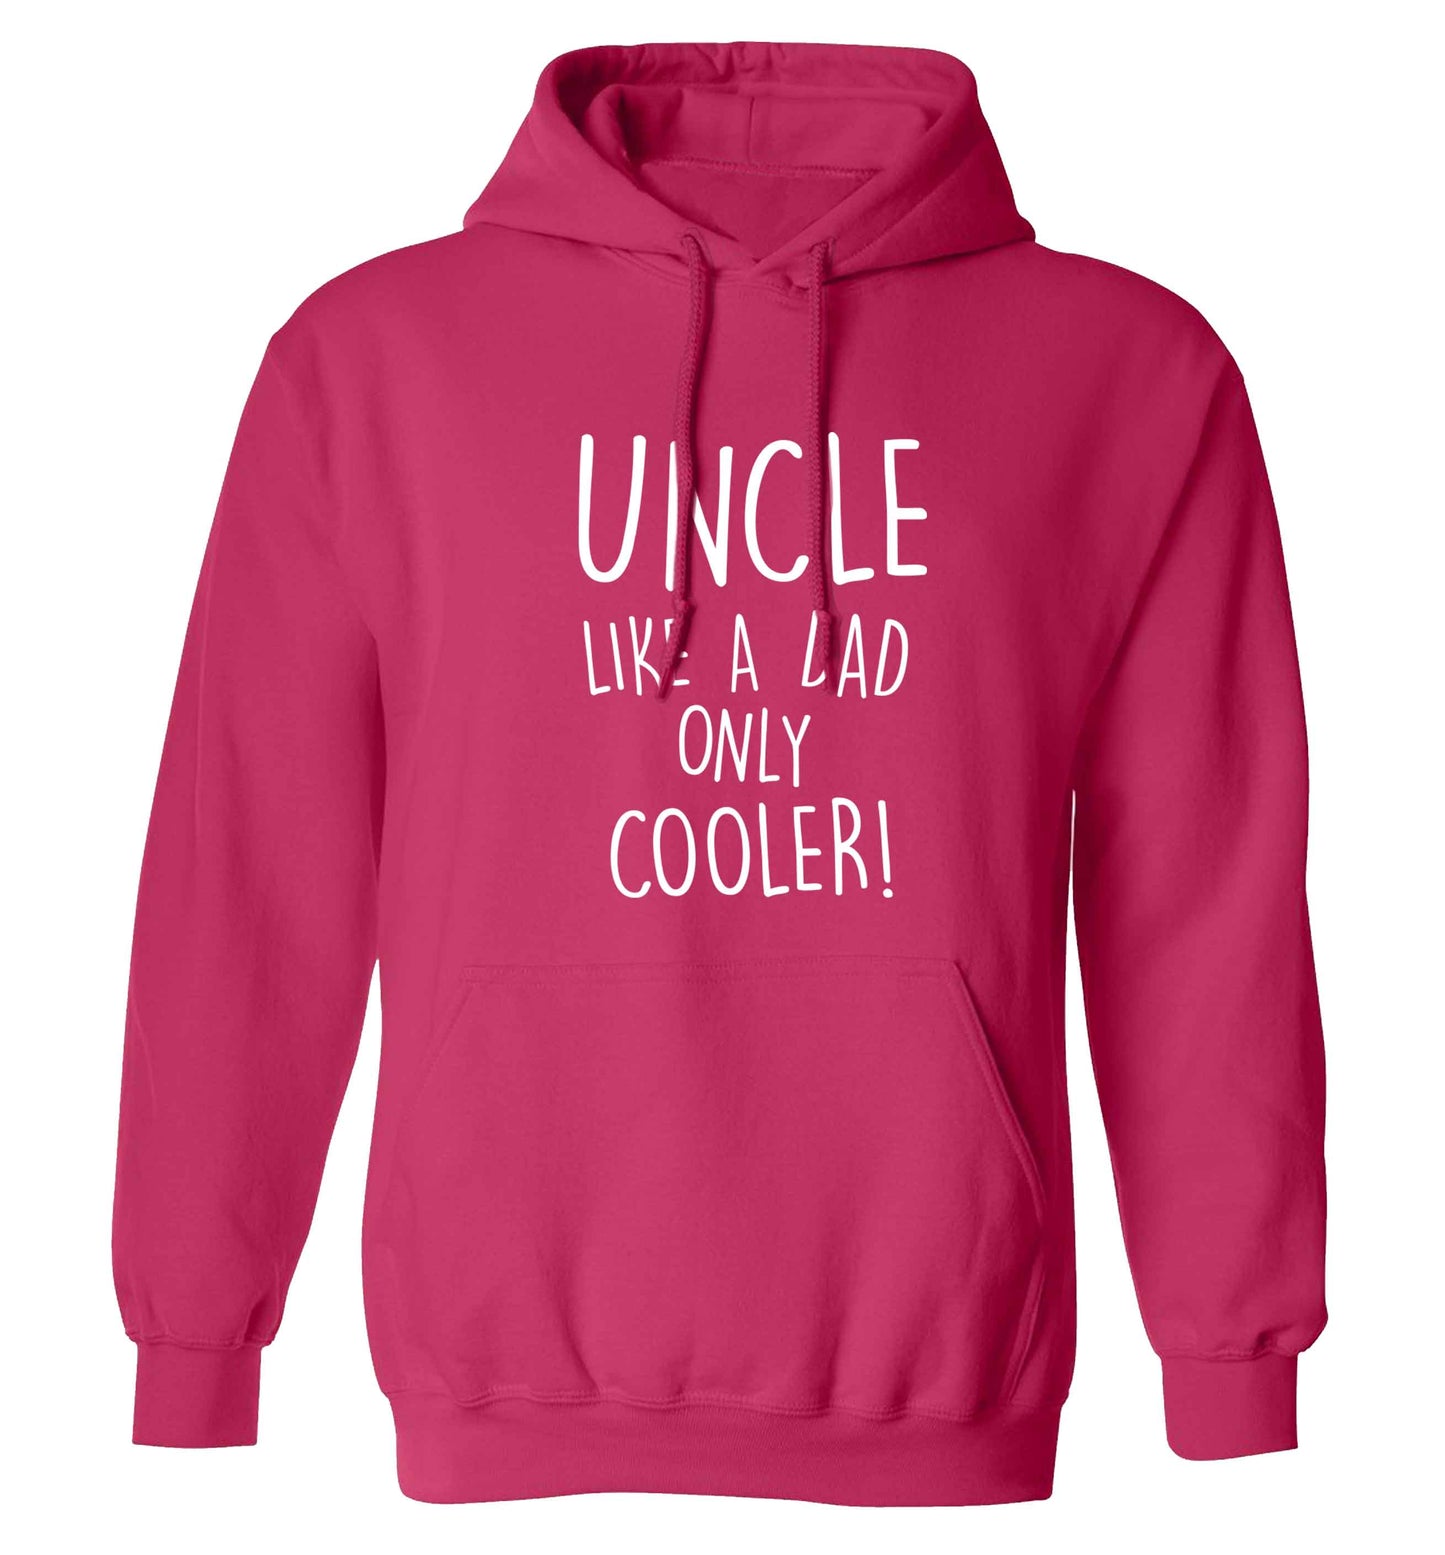 Uncle like a dad only cooler adults unisex pink hoodie 2XL